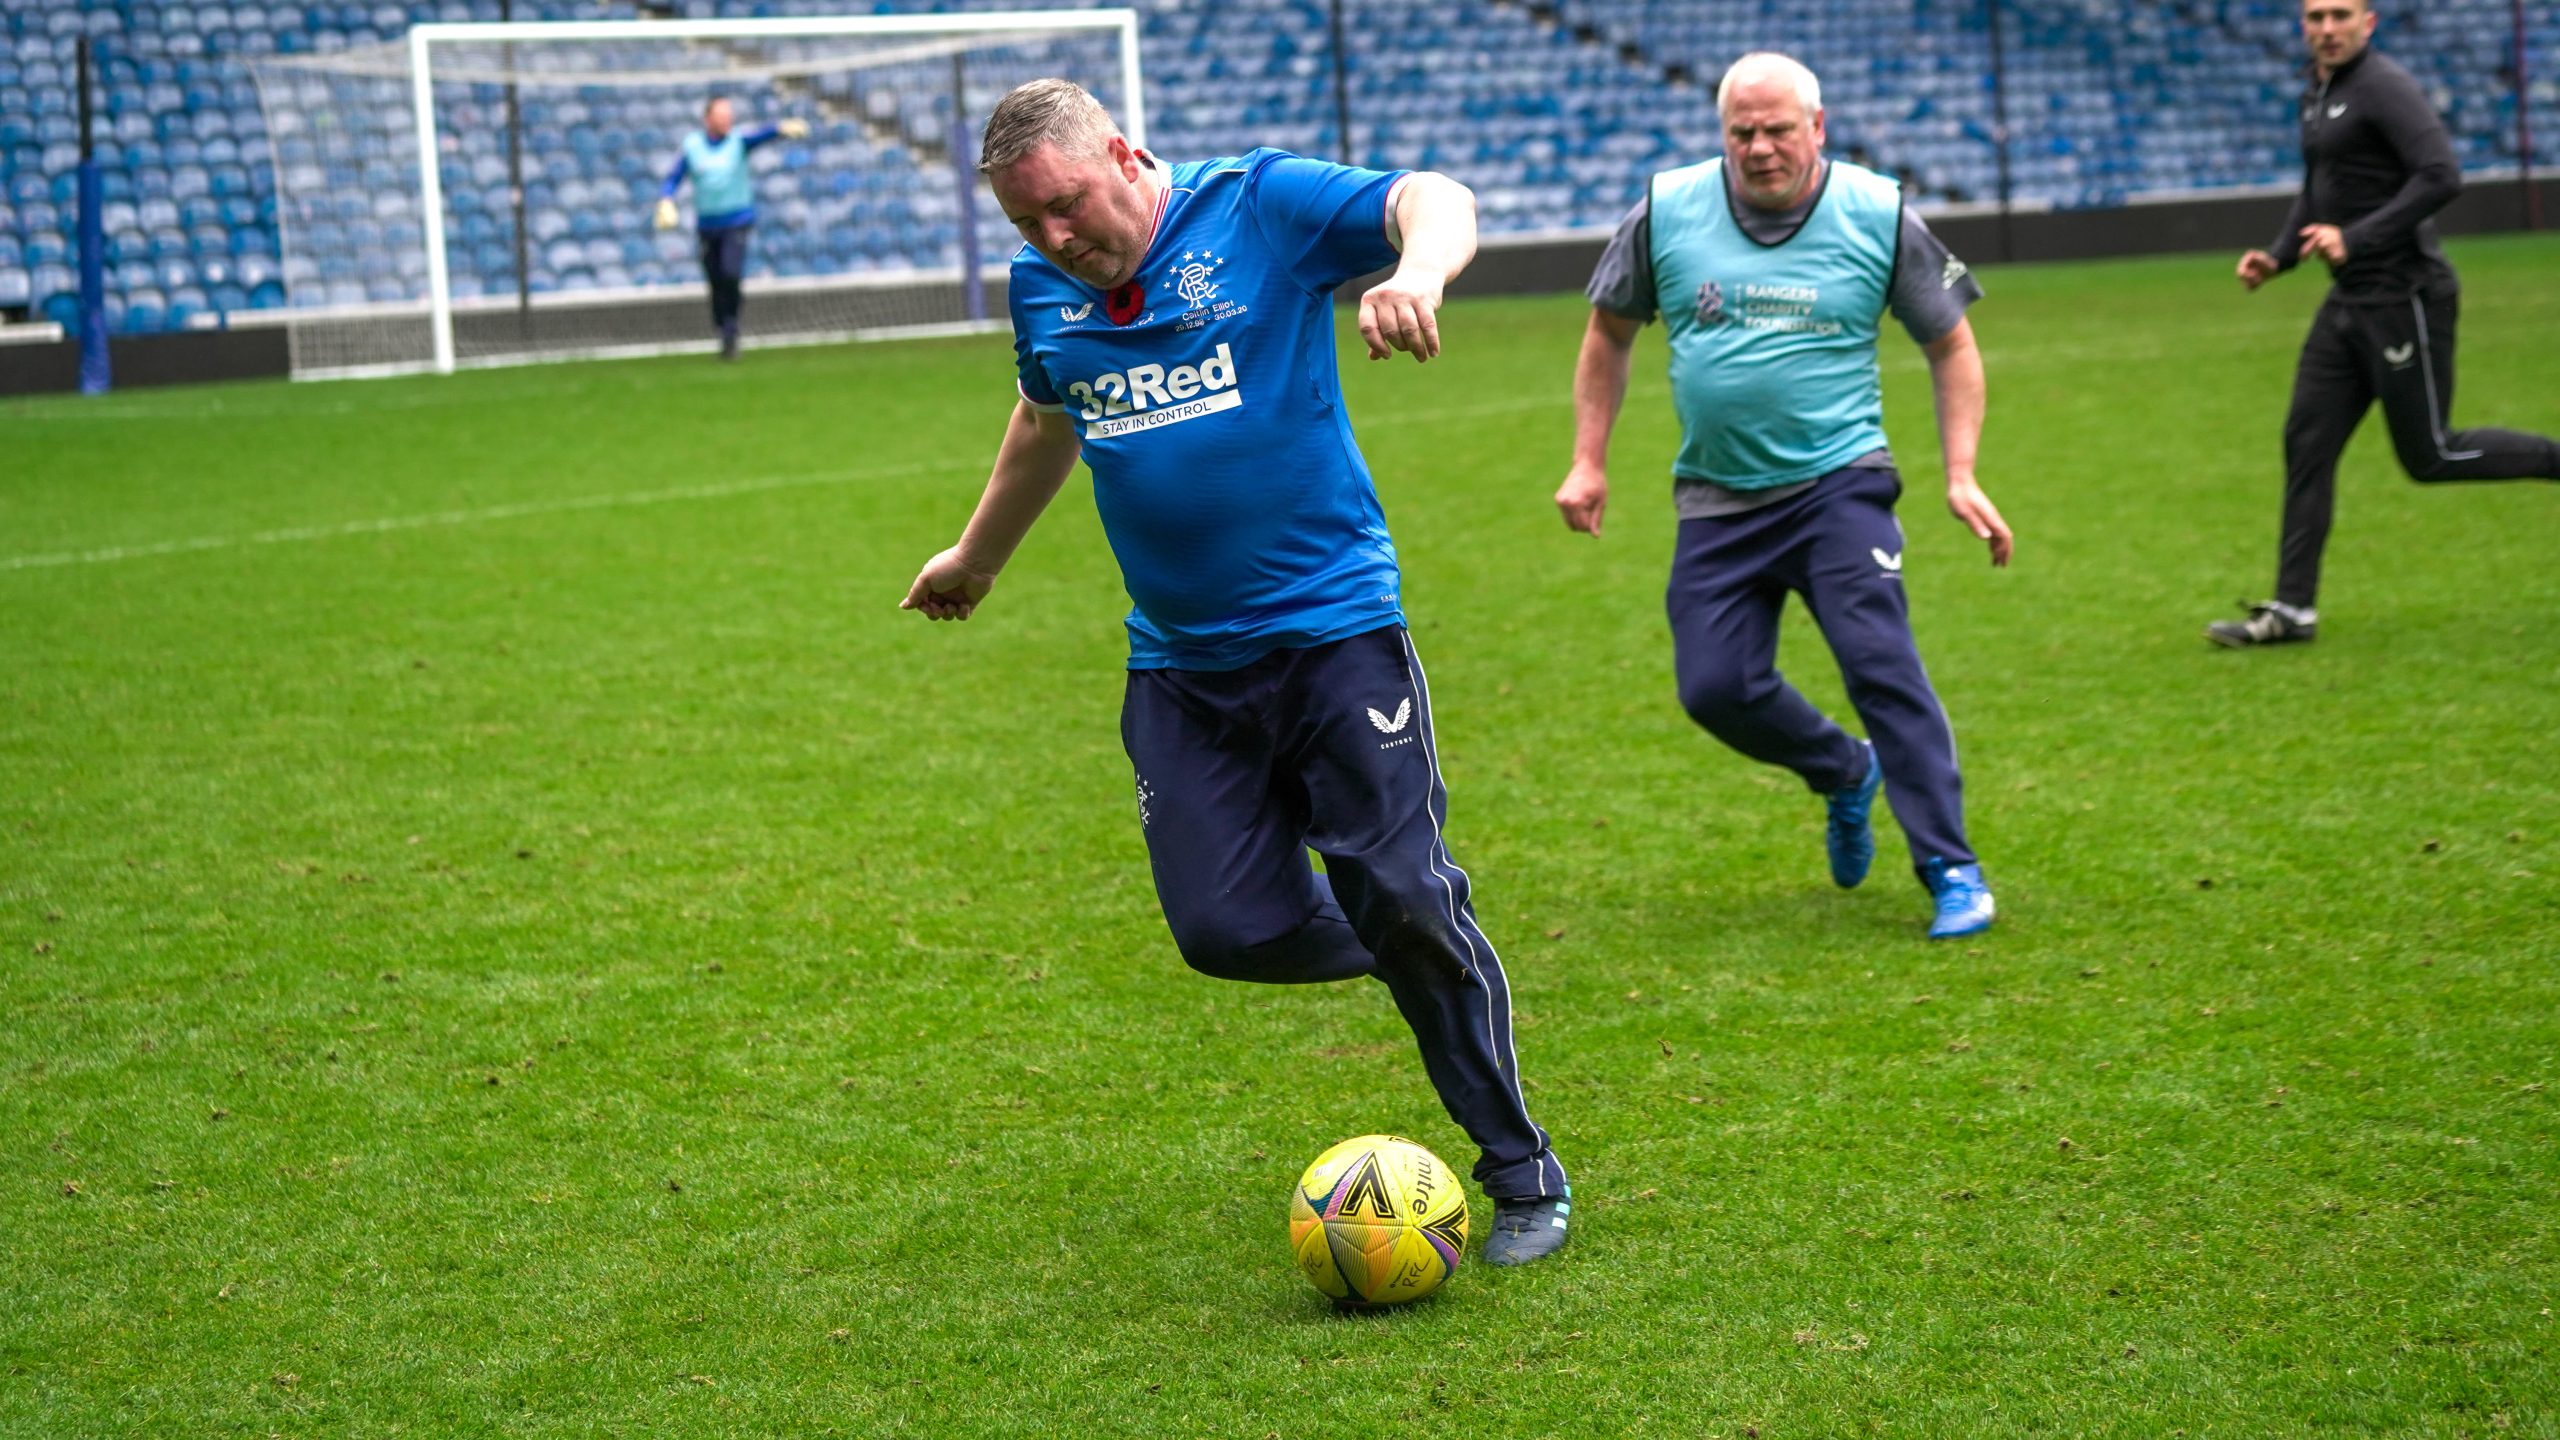 Man in a Rangers top playing football